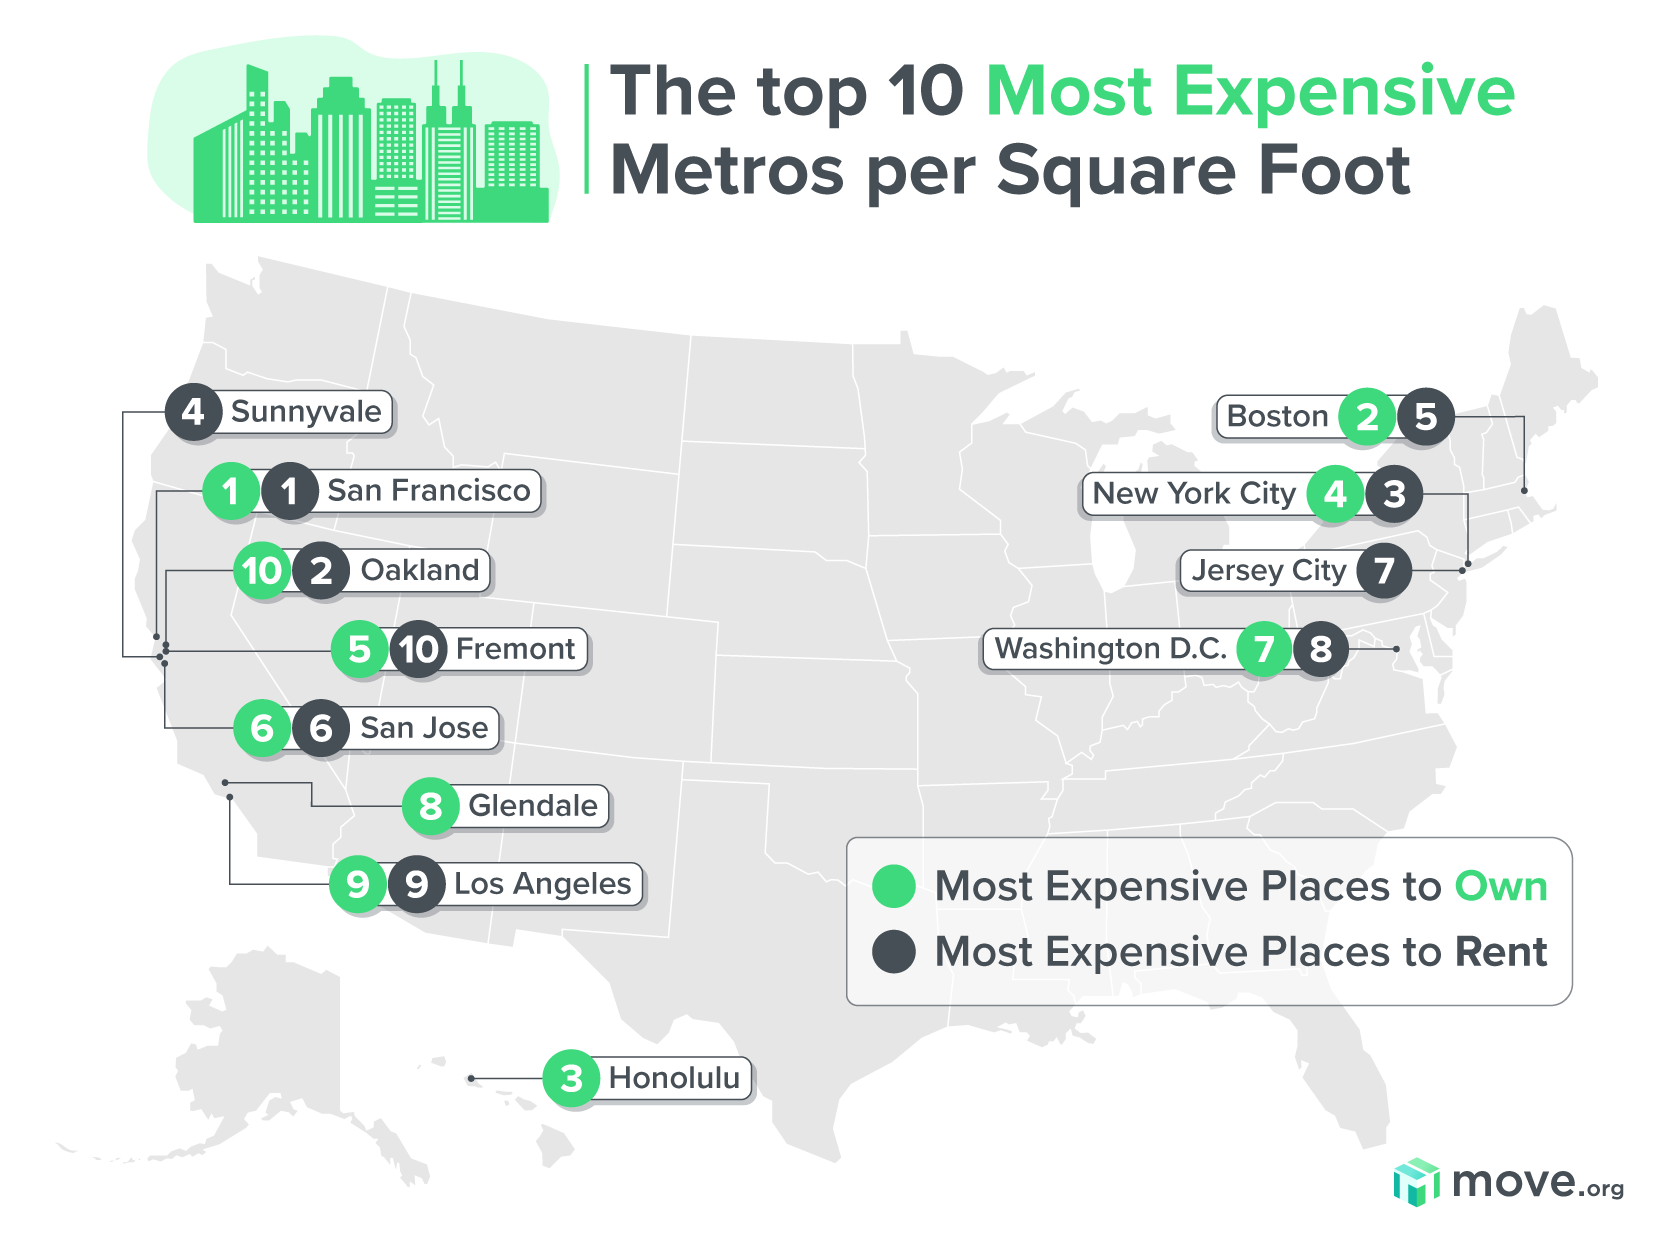 Is San Diego the most expensive city?